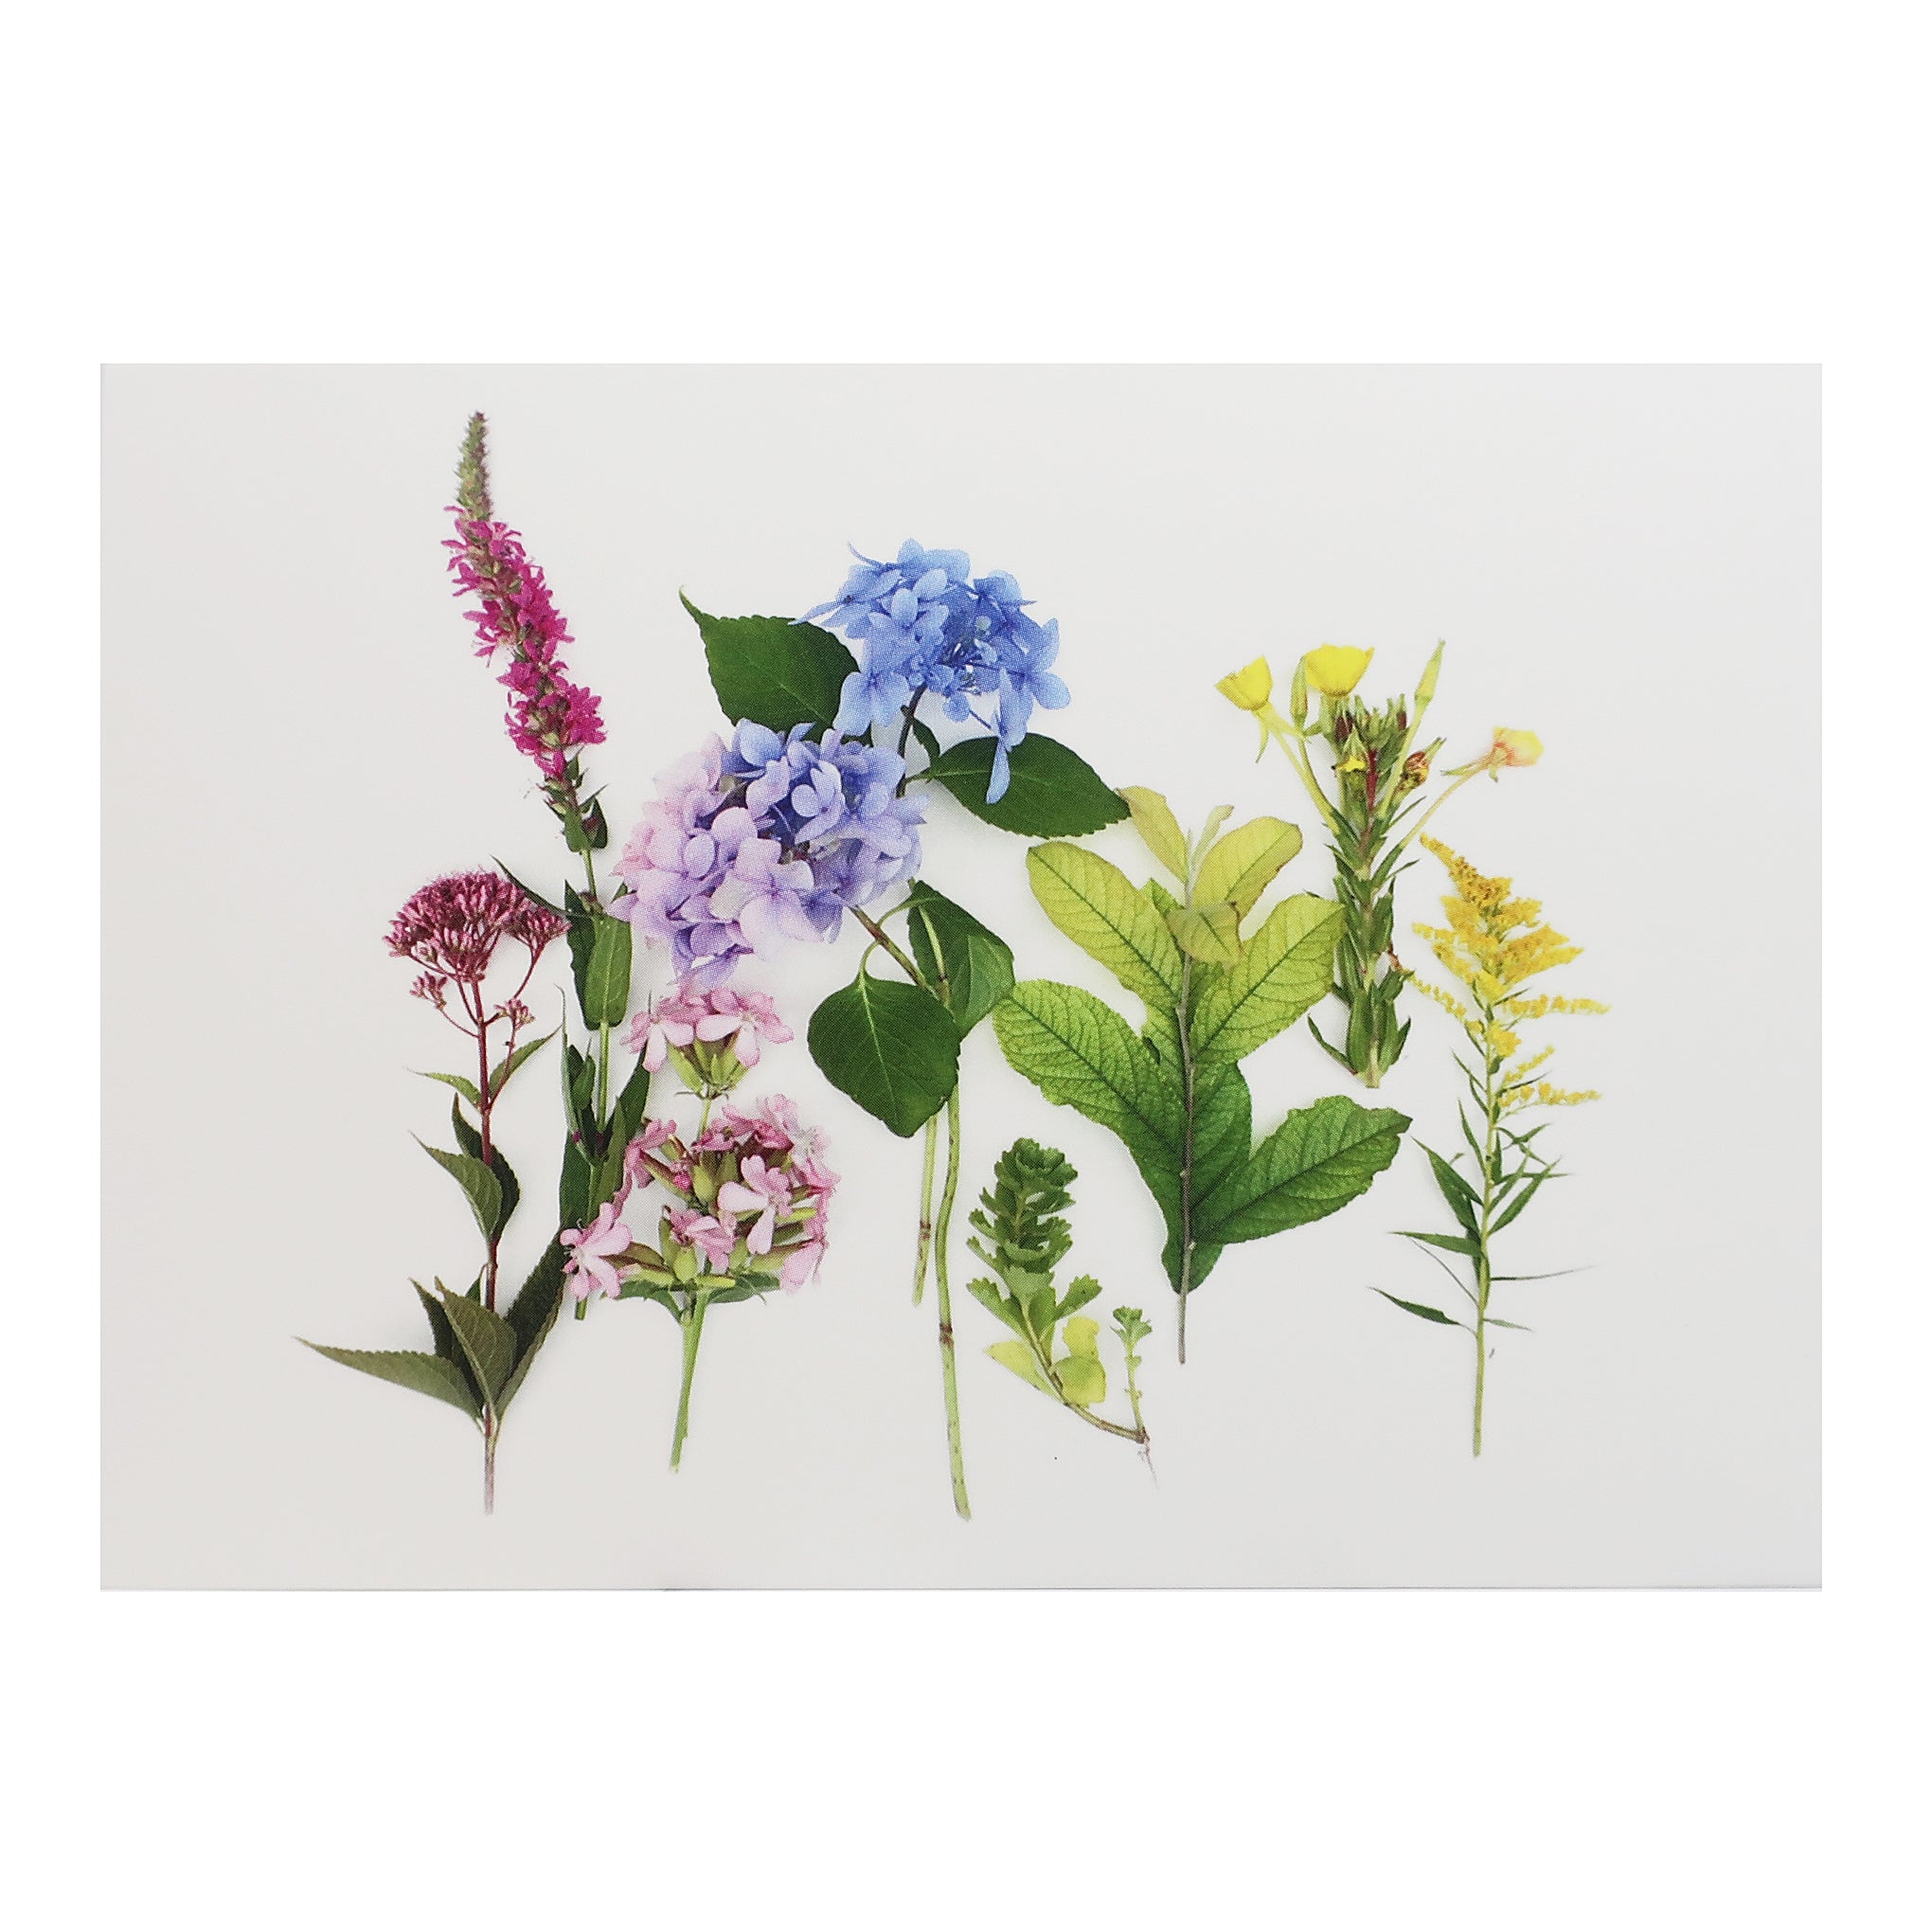 Blank Folding Greeting Card in Pink, Blue and Yellow Wildflowers of Summer